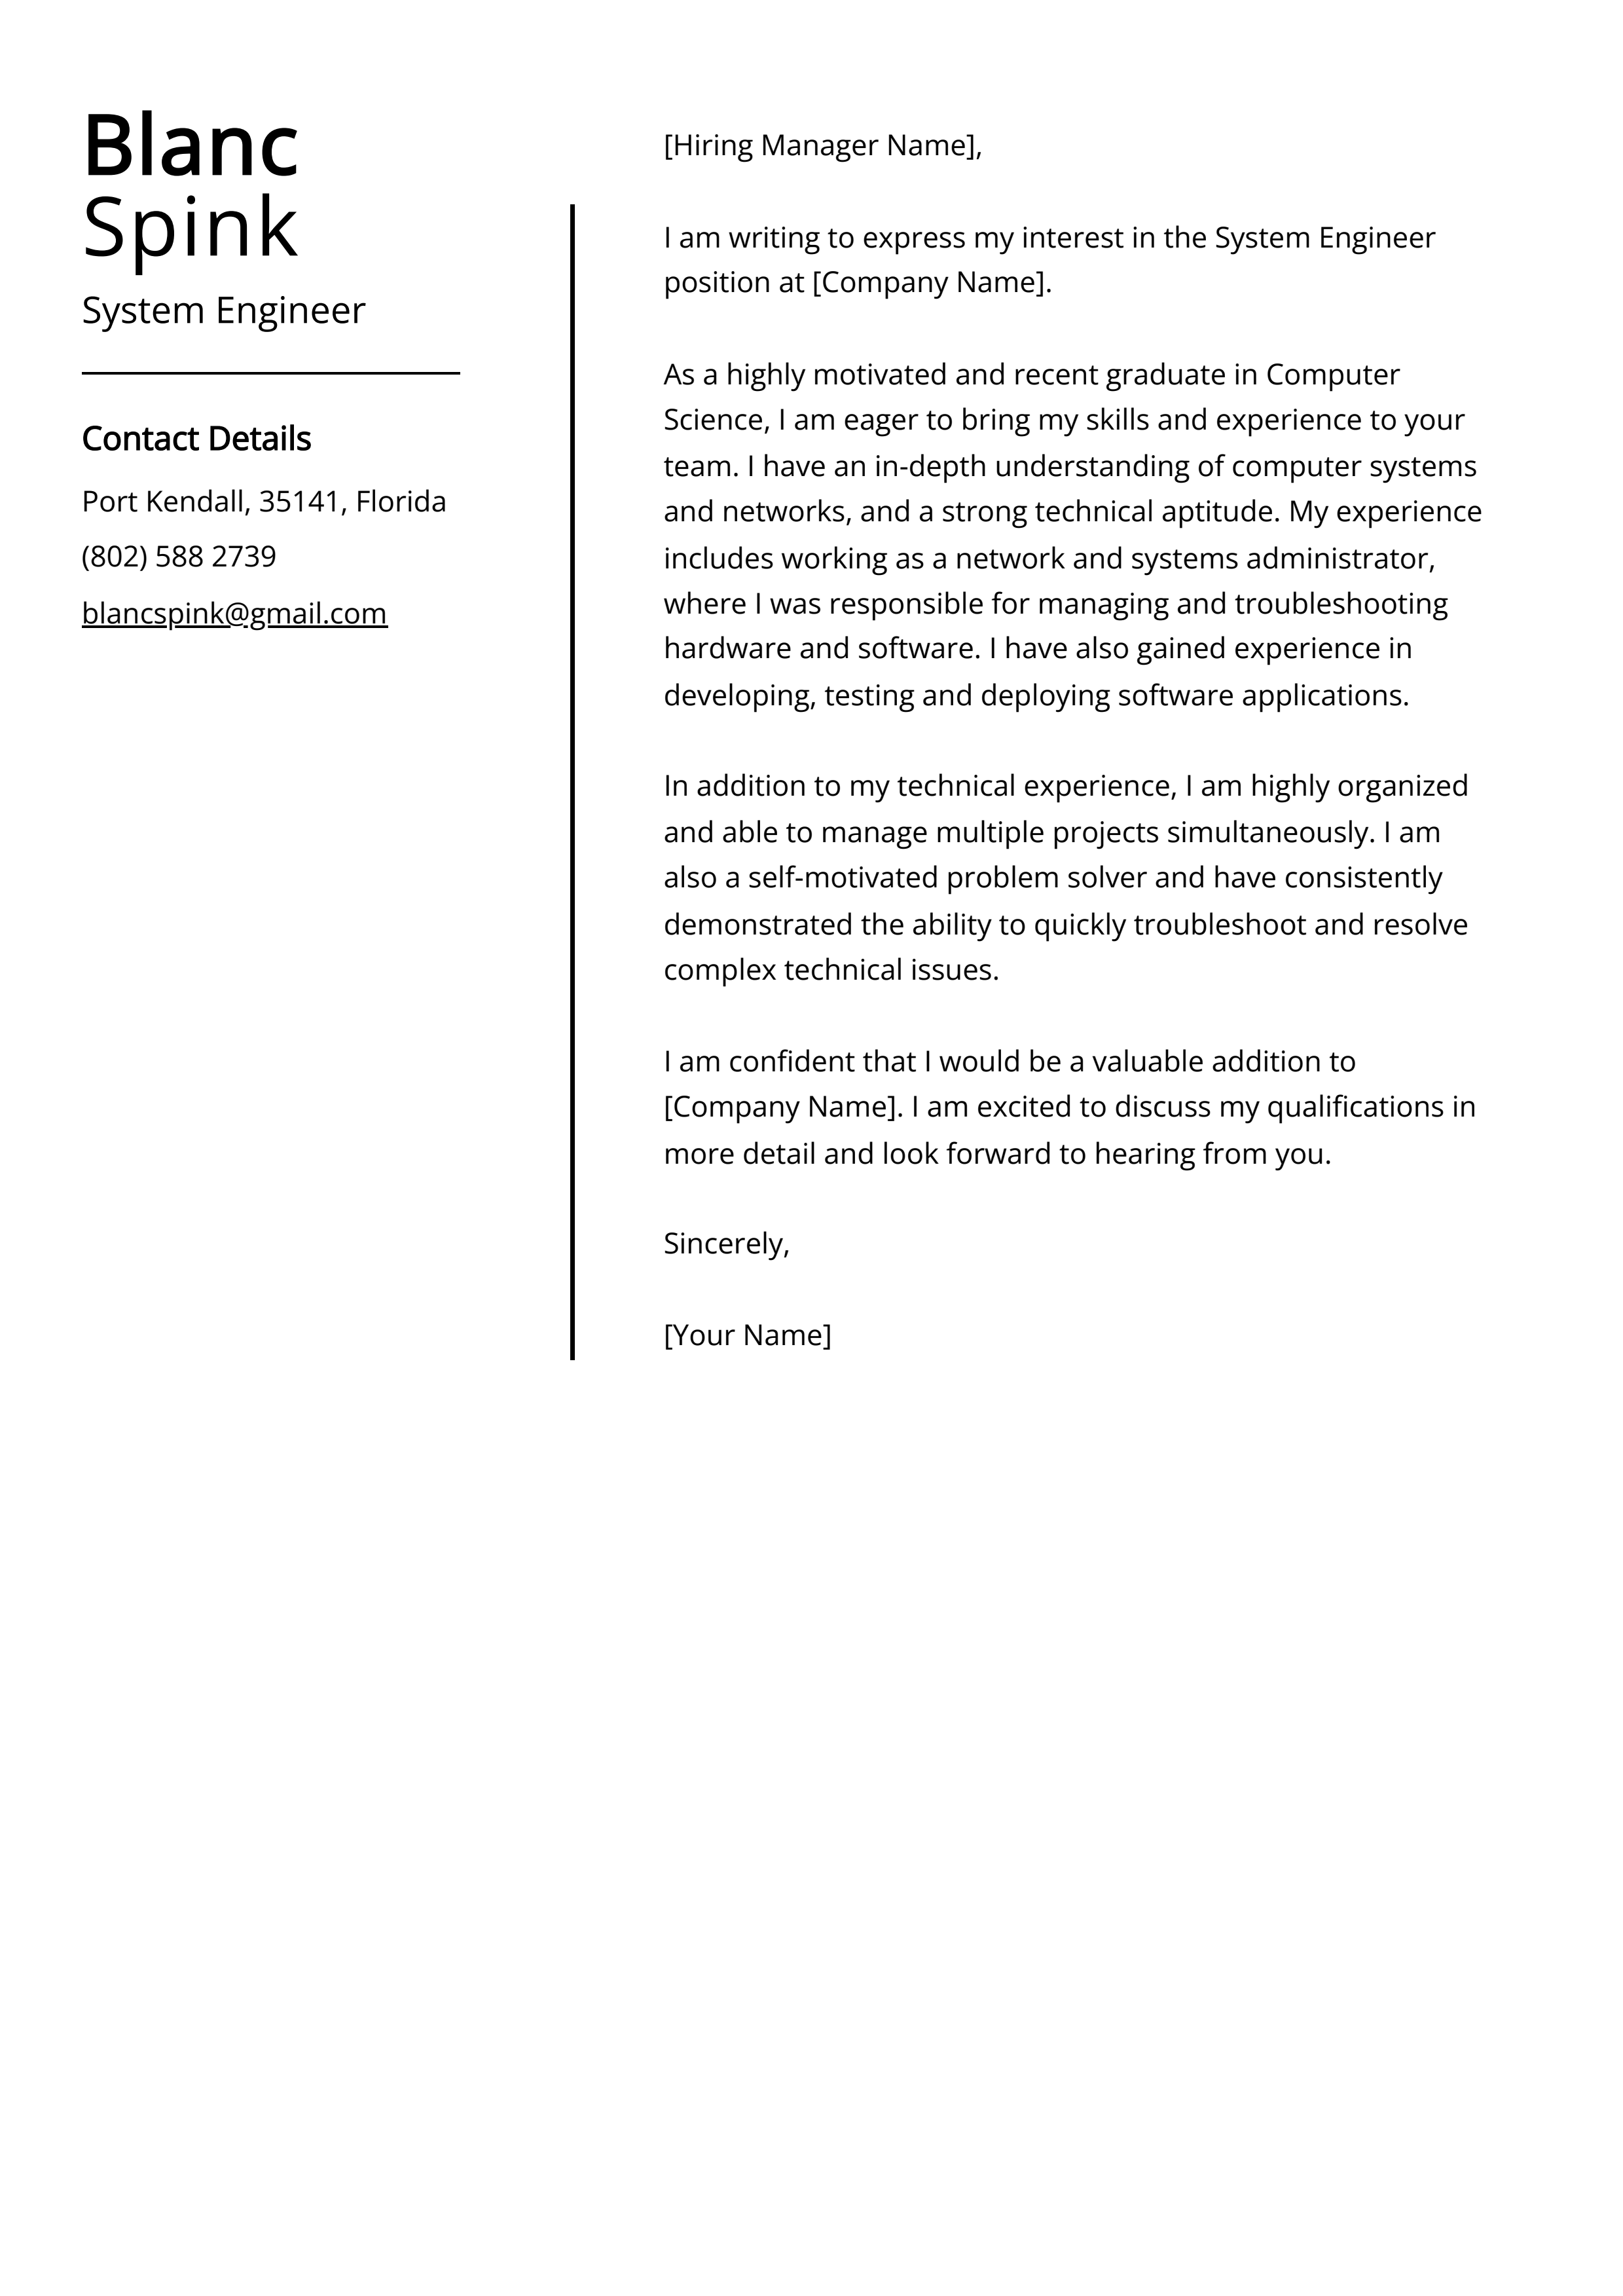 Experienced System Engineer Cover Letter Example